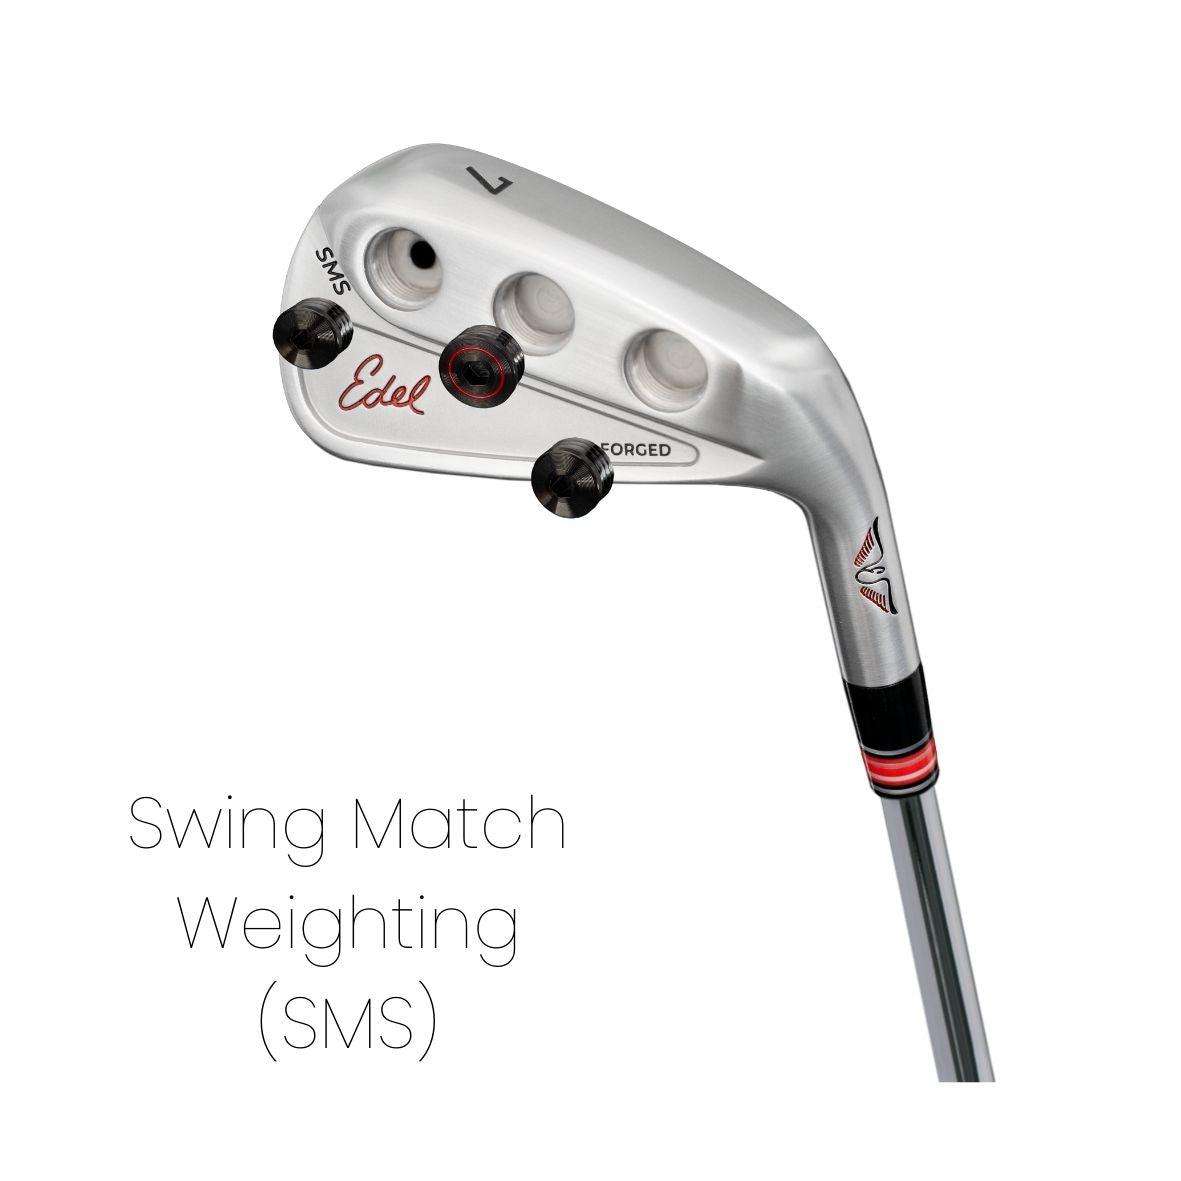 Edel SMS Irons Swing Match Weighting system